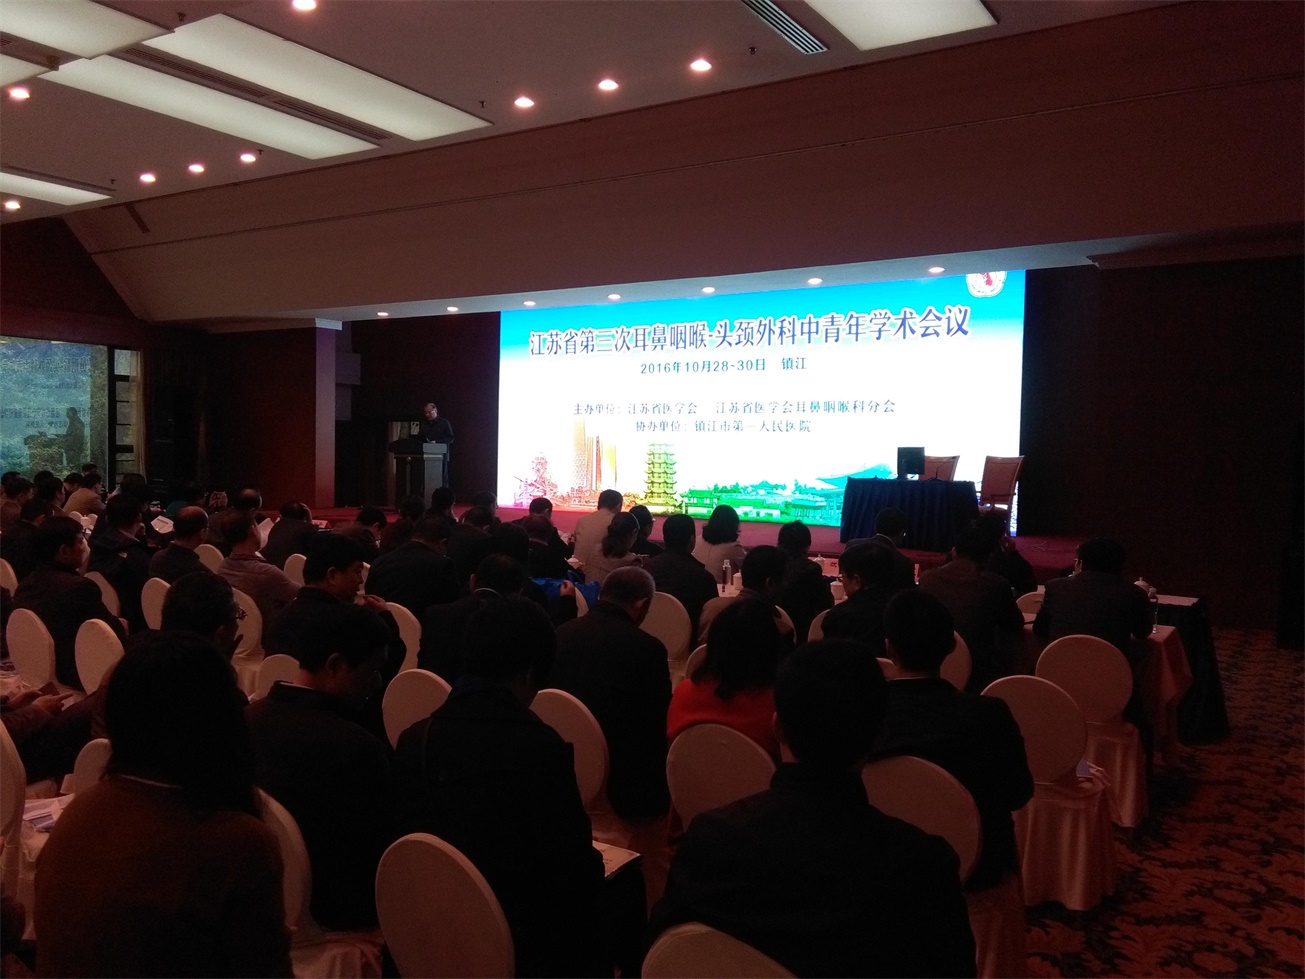 The Third Youth Conference of Otolaryngology Head and Neck Surgery in Jiangsu